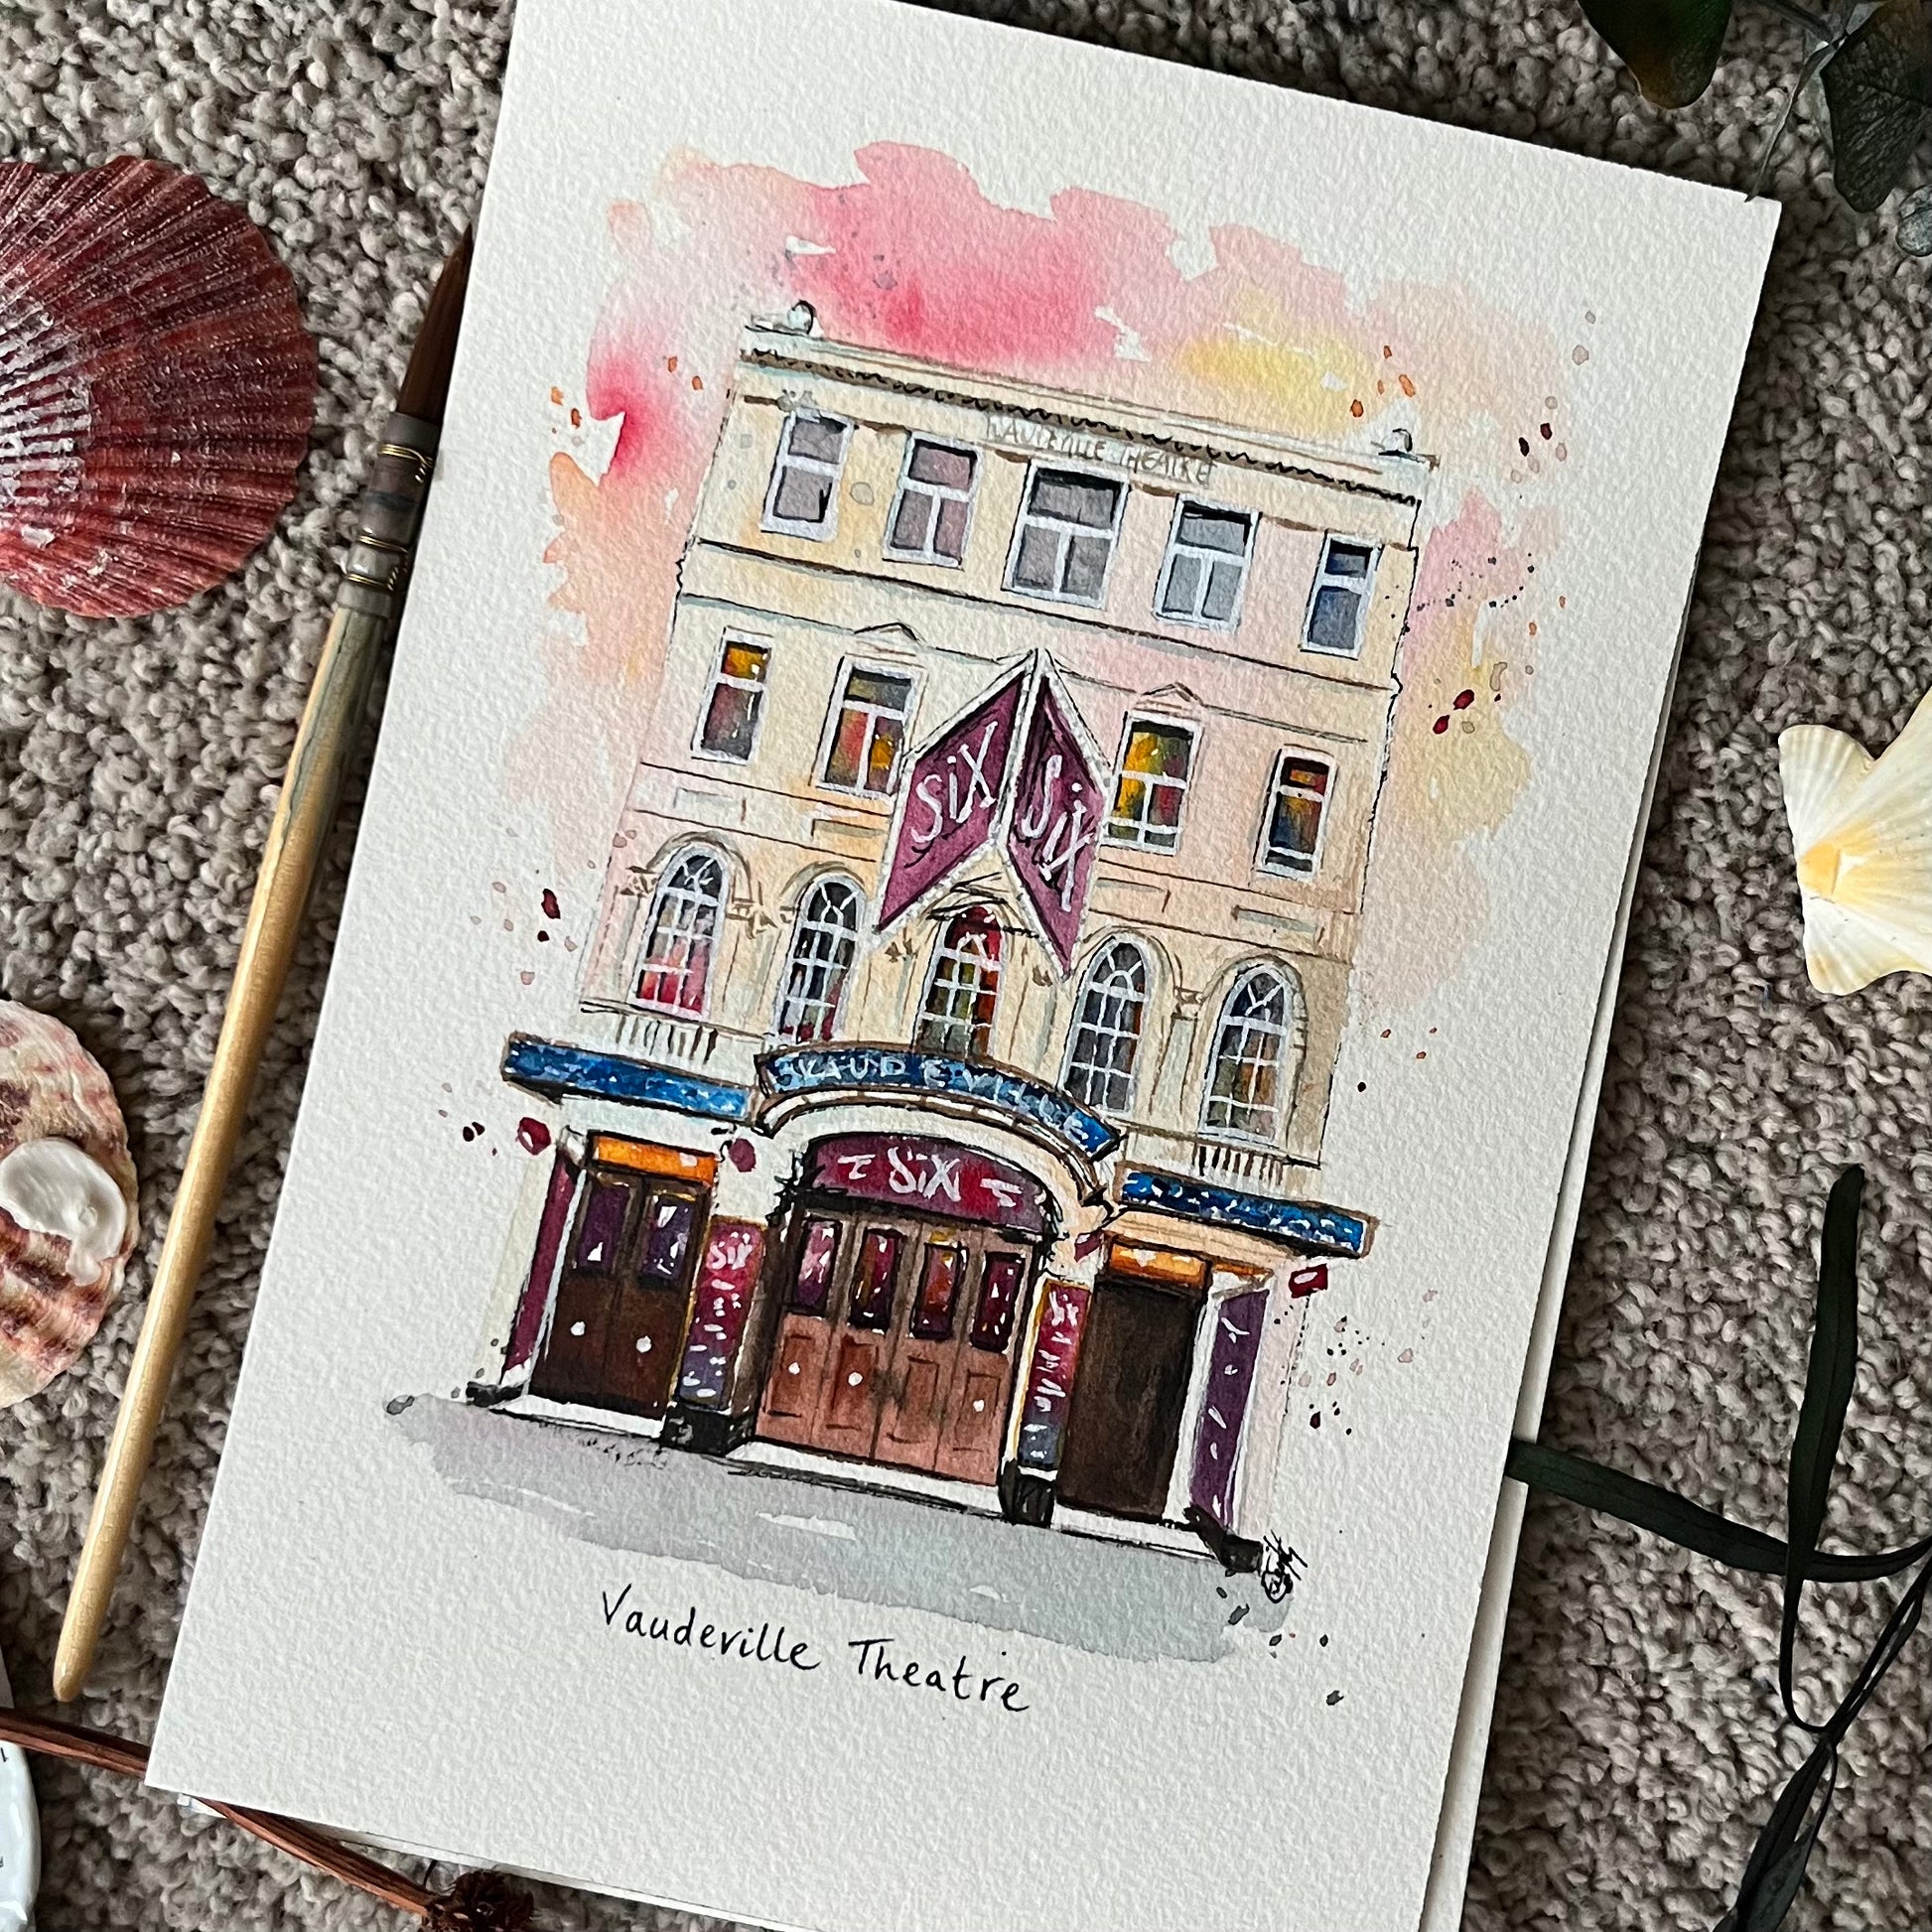 A watercolour illustration by artist, Eve Leoni Smith. It features the Vaudeville theatre in London's West End, home to 'Six the Musical'.